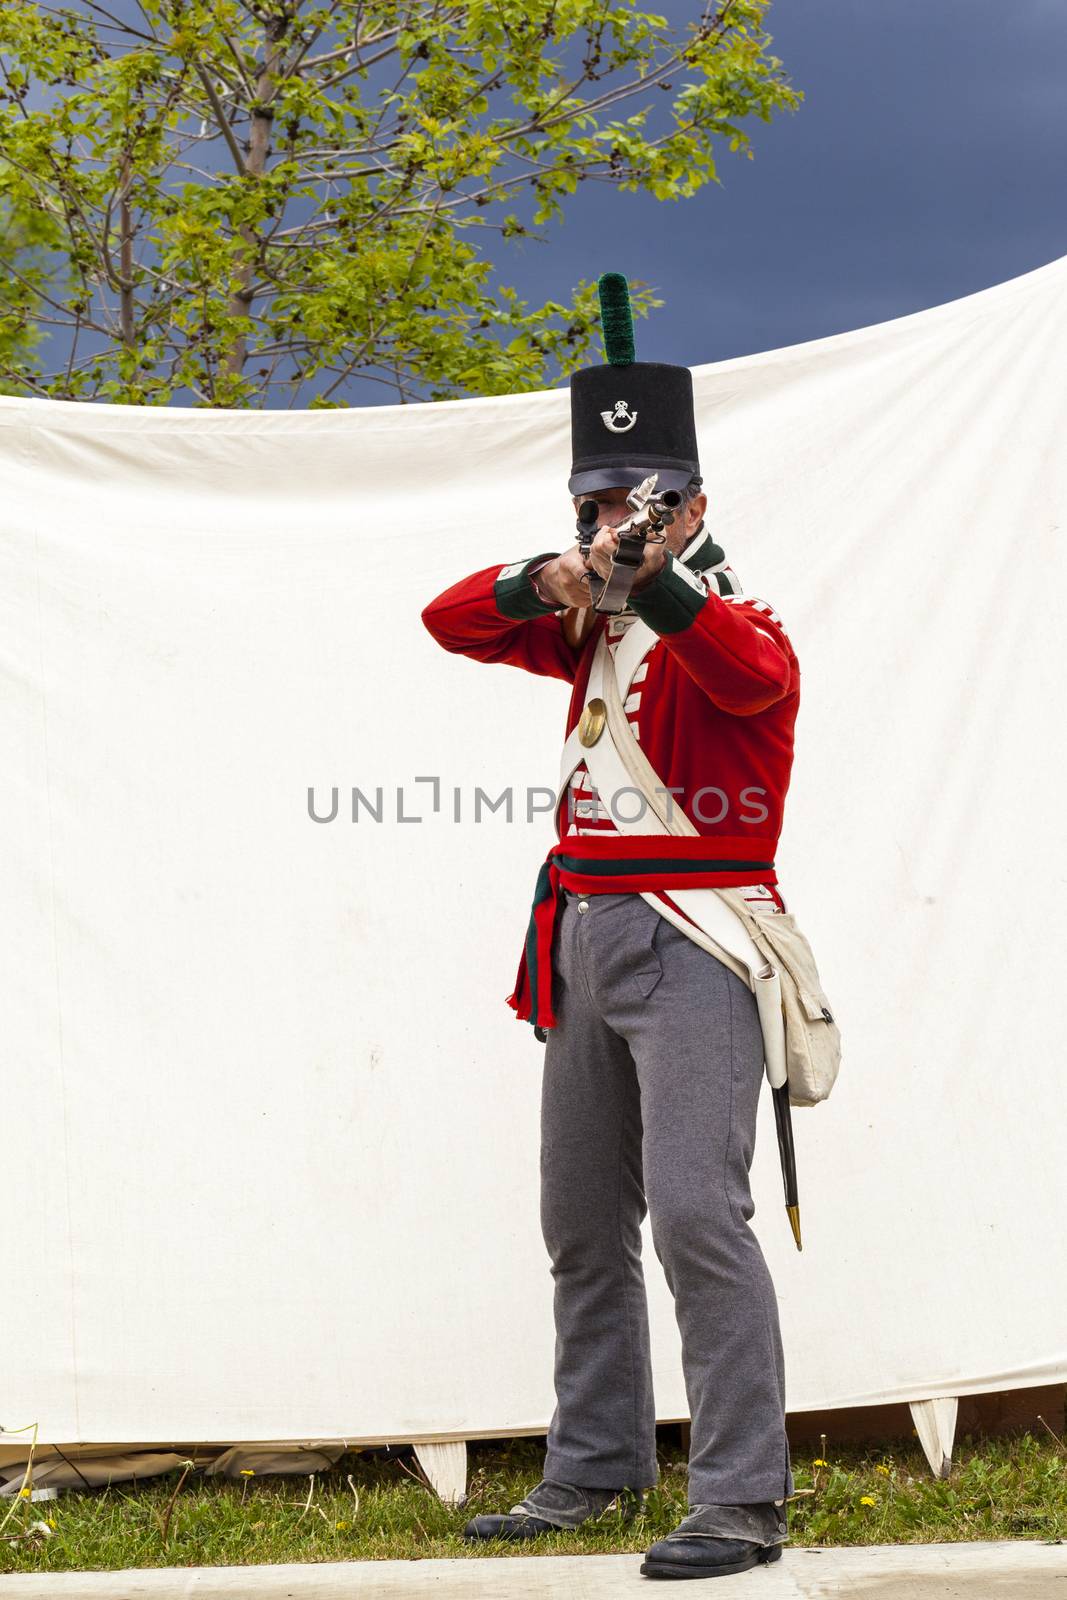 Soldier In Red Uniform by Imagecom